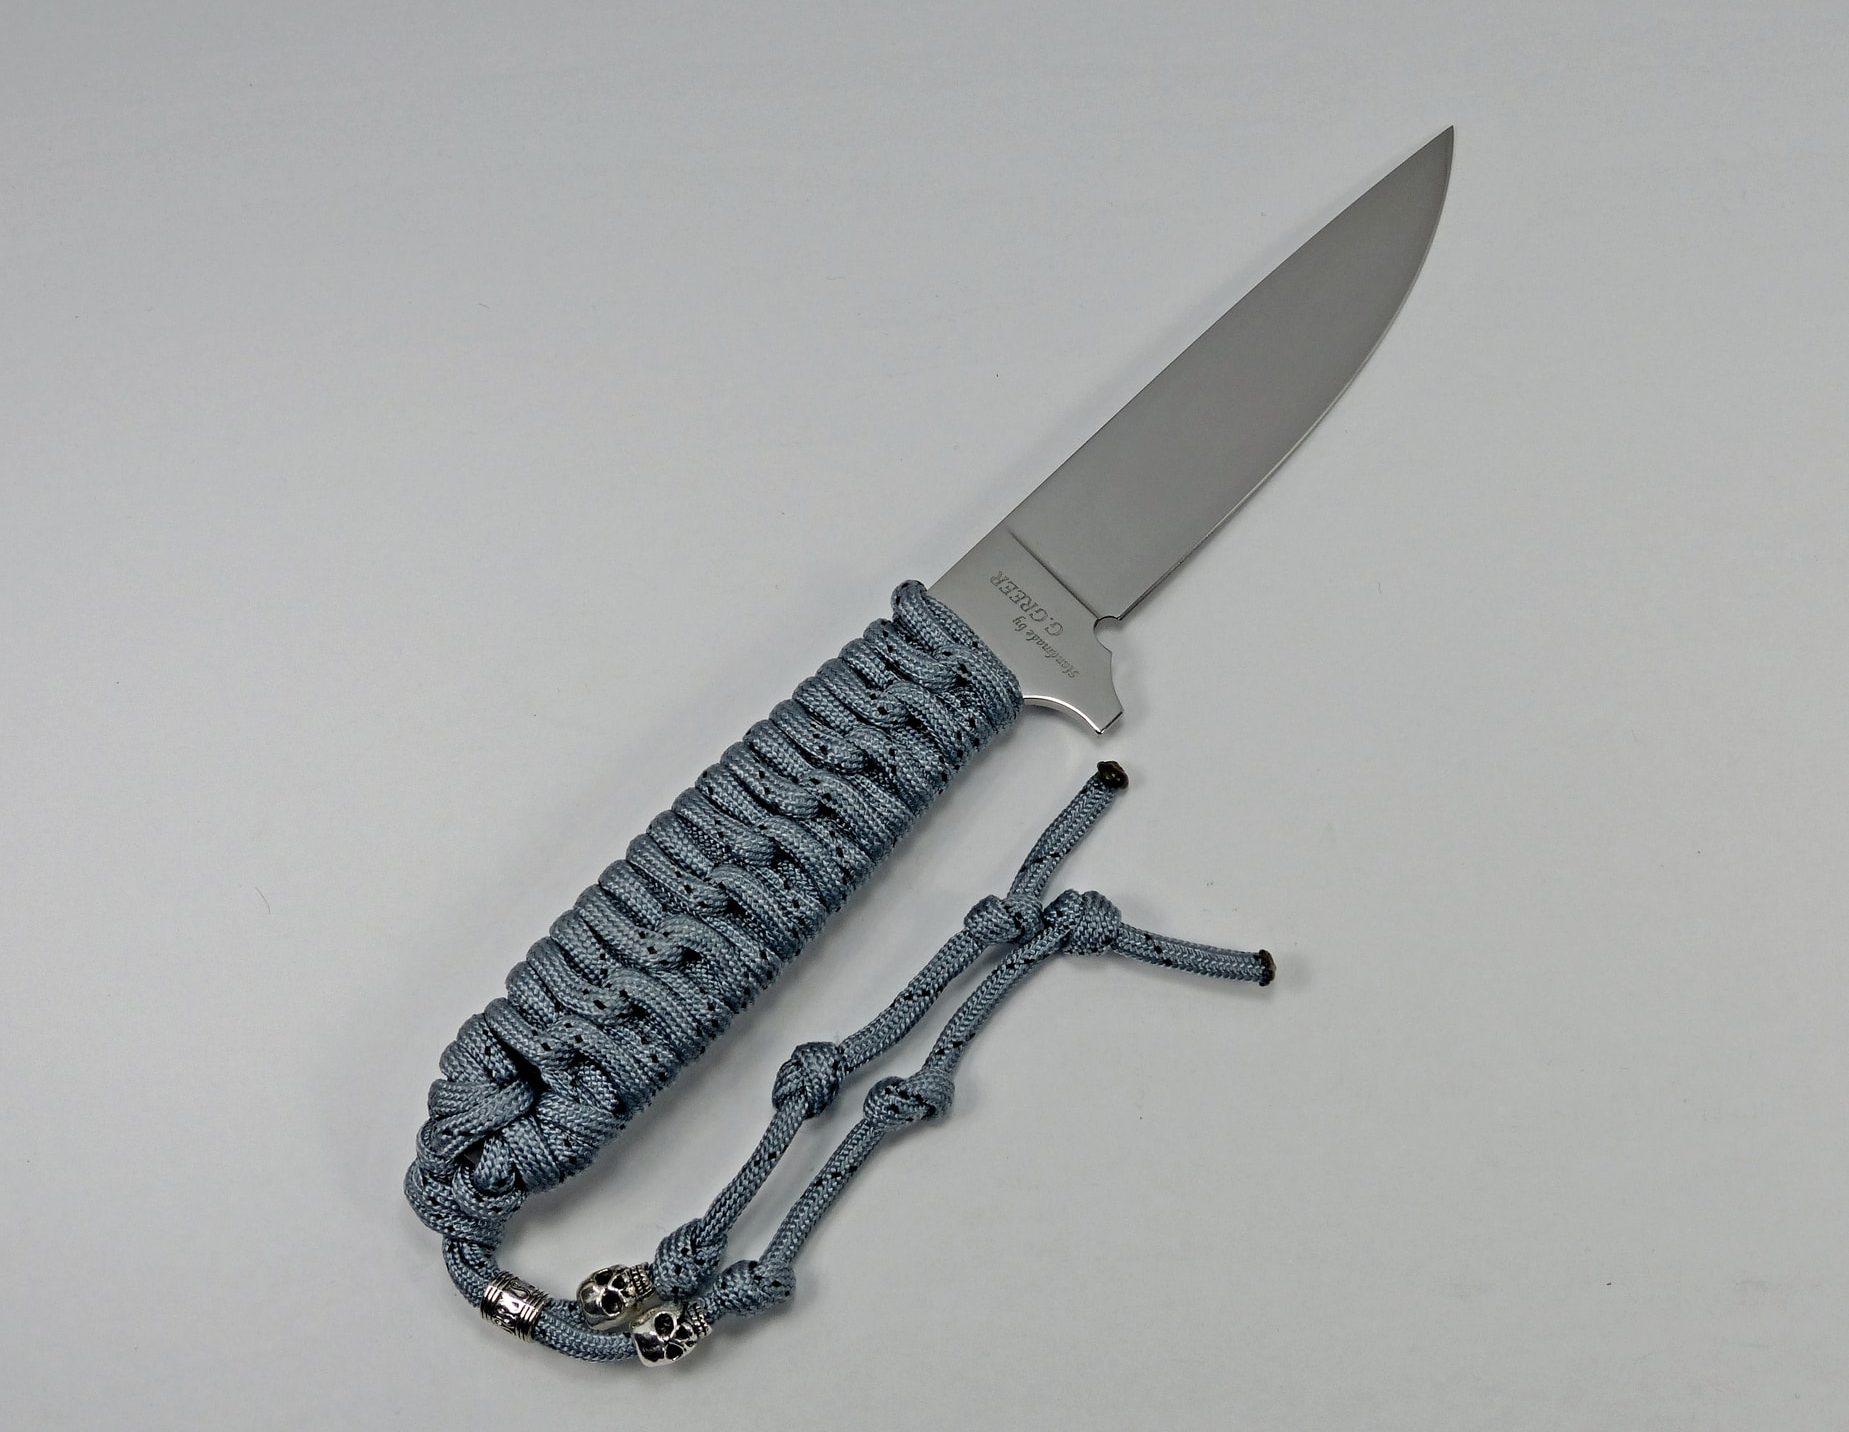 P-2 Titanium colored paracord knife with flat grind blade and lanyard